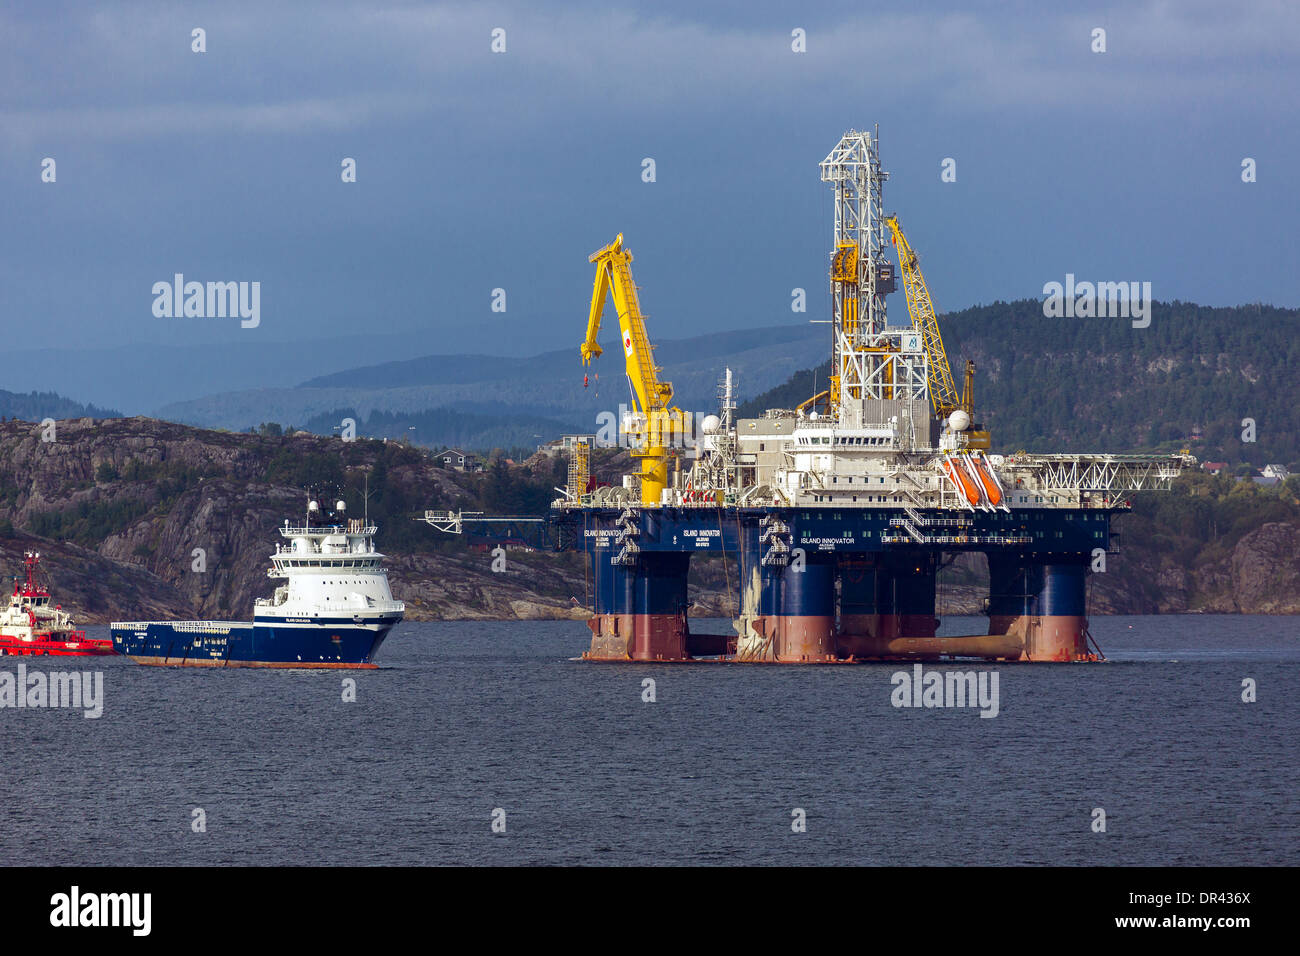 Oil Drilling rig Island Innovator and the Offshore Supply Ship Island Crusader Stock Photo